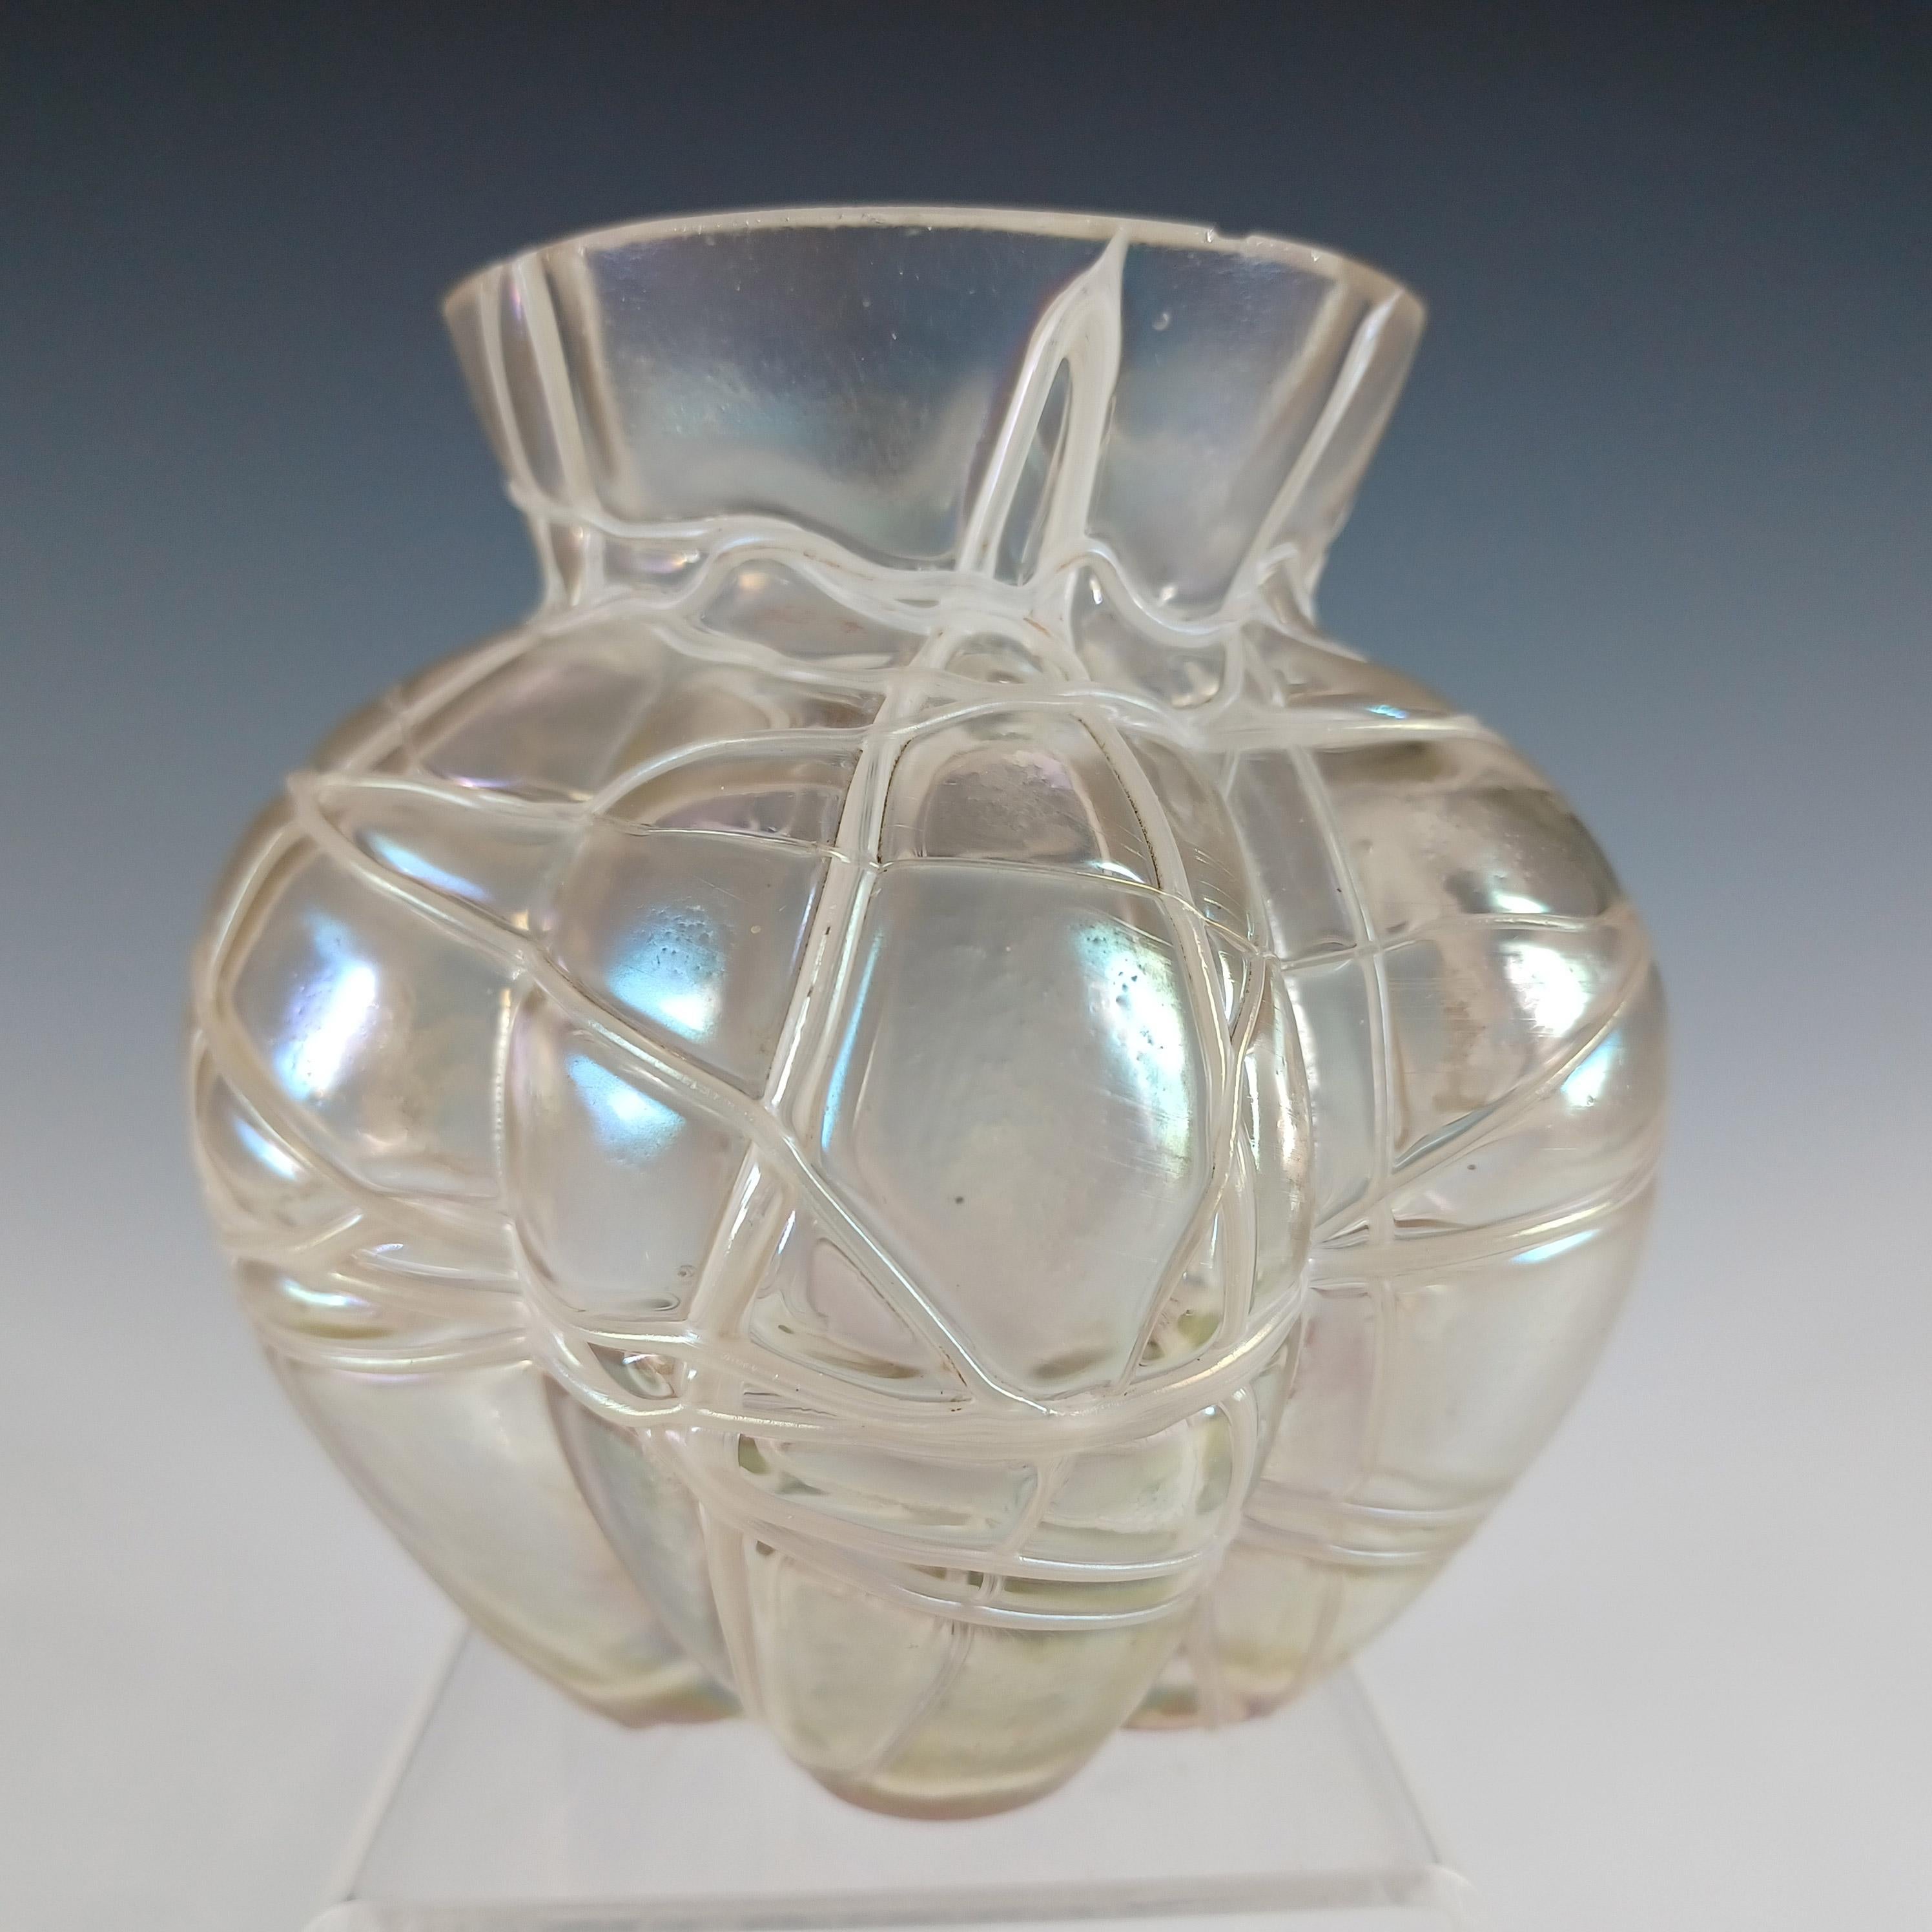 A beautiful Czech / Bohemian iridescent glass vase with white veined threading, from the late 19th century art nouveau period. Made by Kralik, this design is shown on the Kralik website.

Please note: Although this vase is obviously too small to